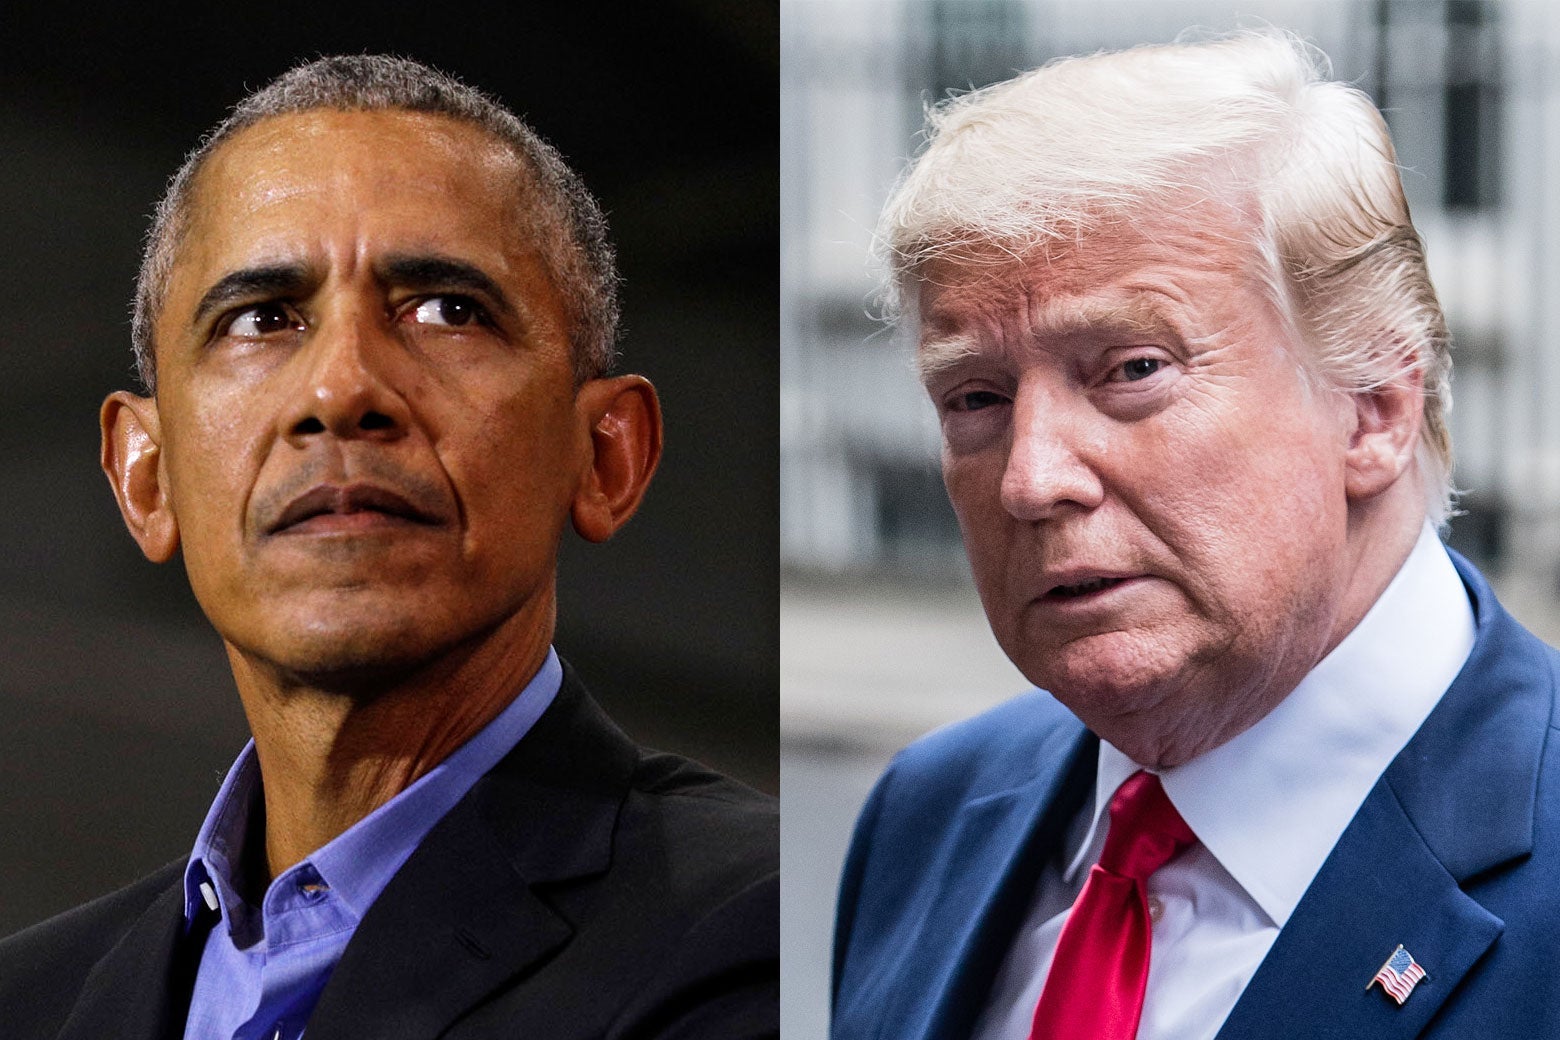 Photo side-by-side of former President Barack Obama and President Donald Trump